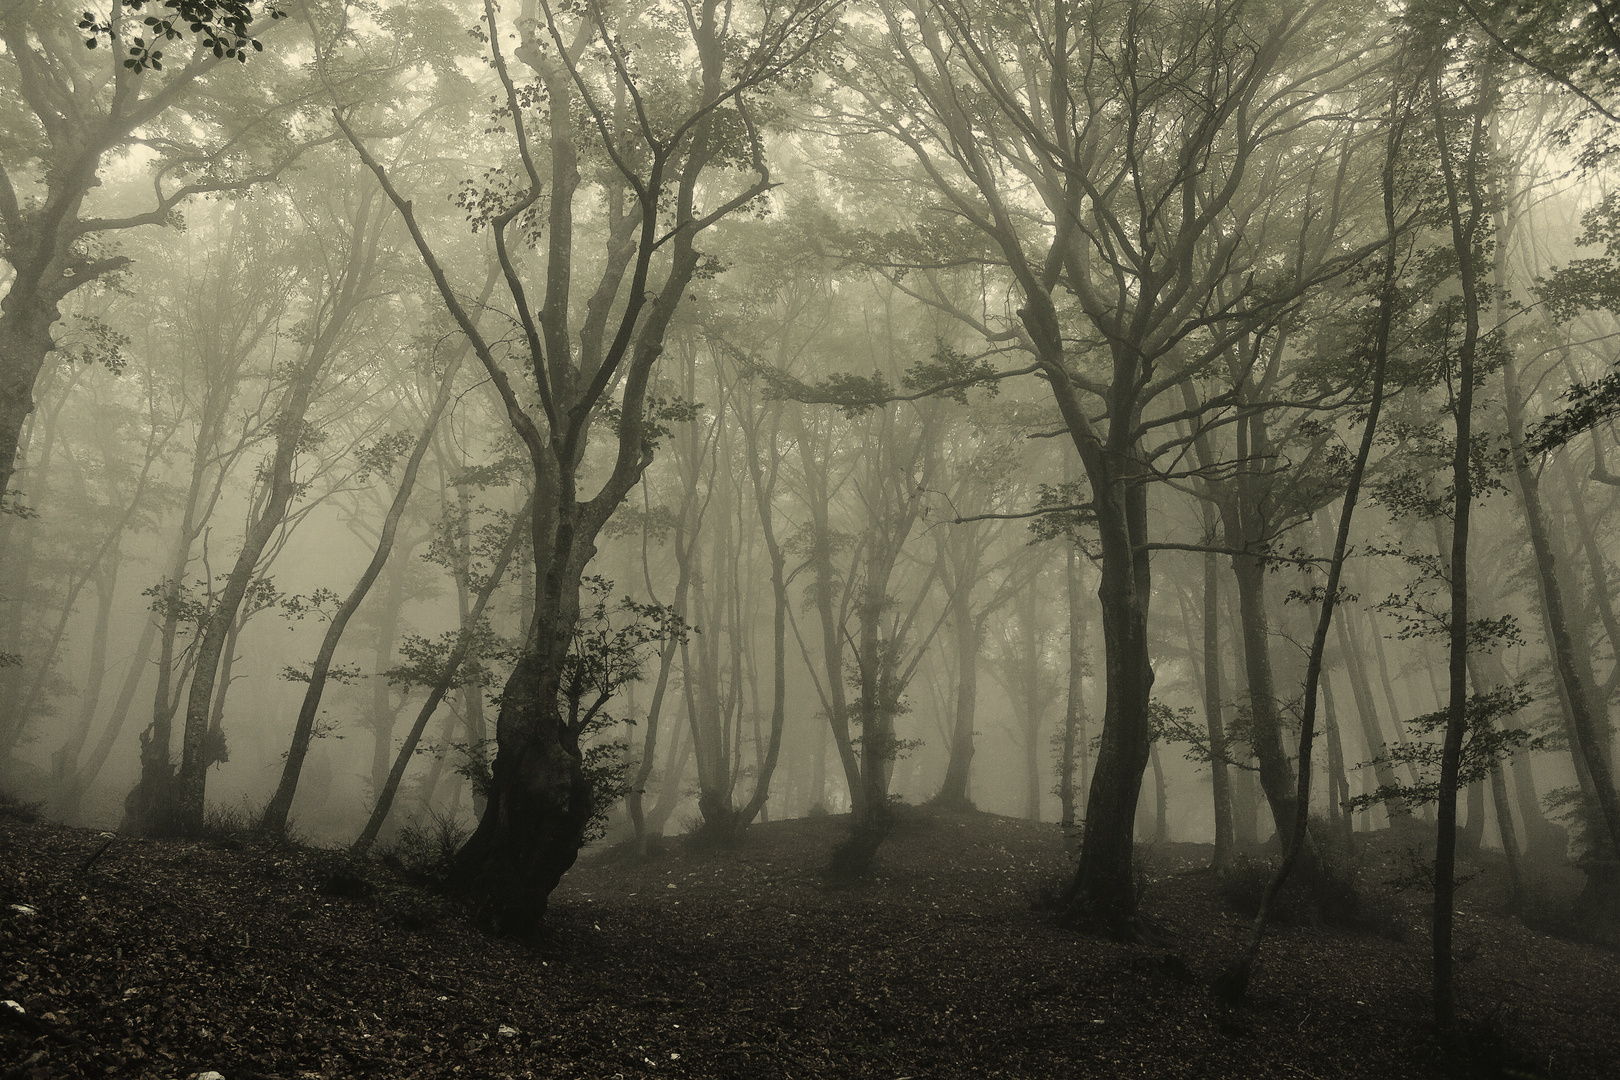 Fog descends into the forest